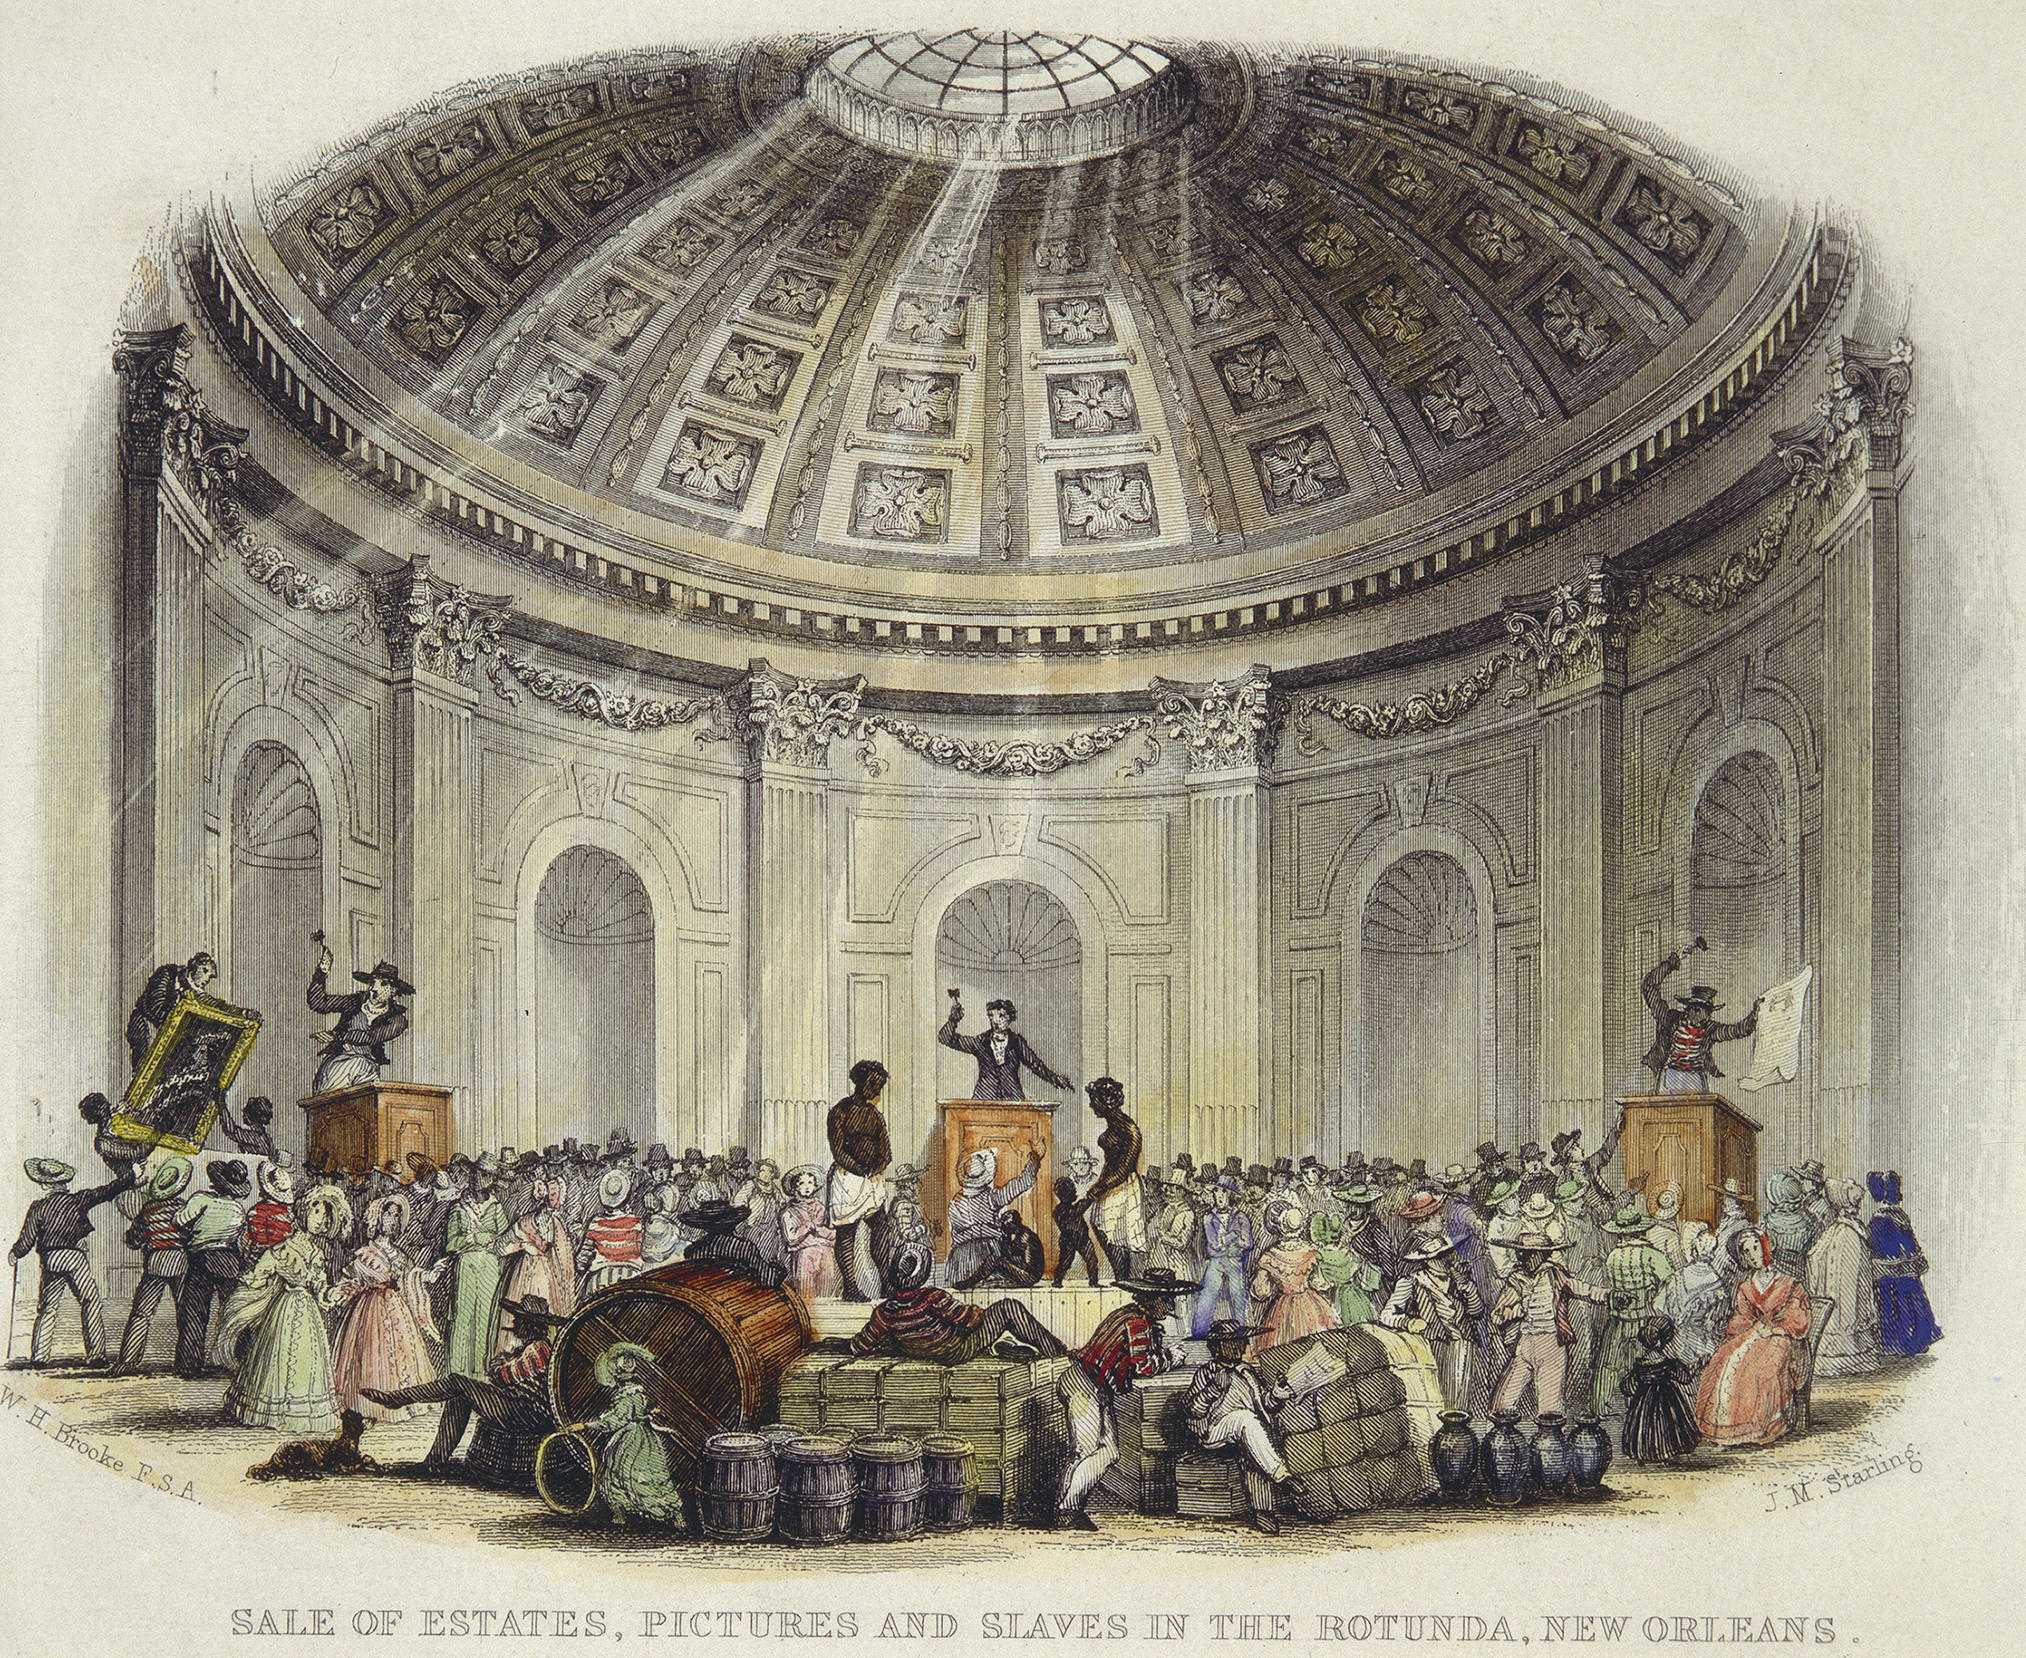 Illustration of auction at the St. Louis hotel